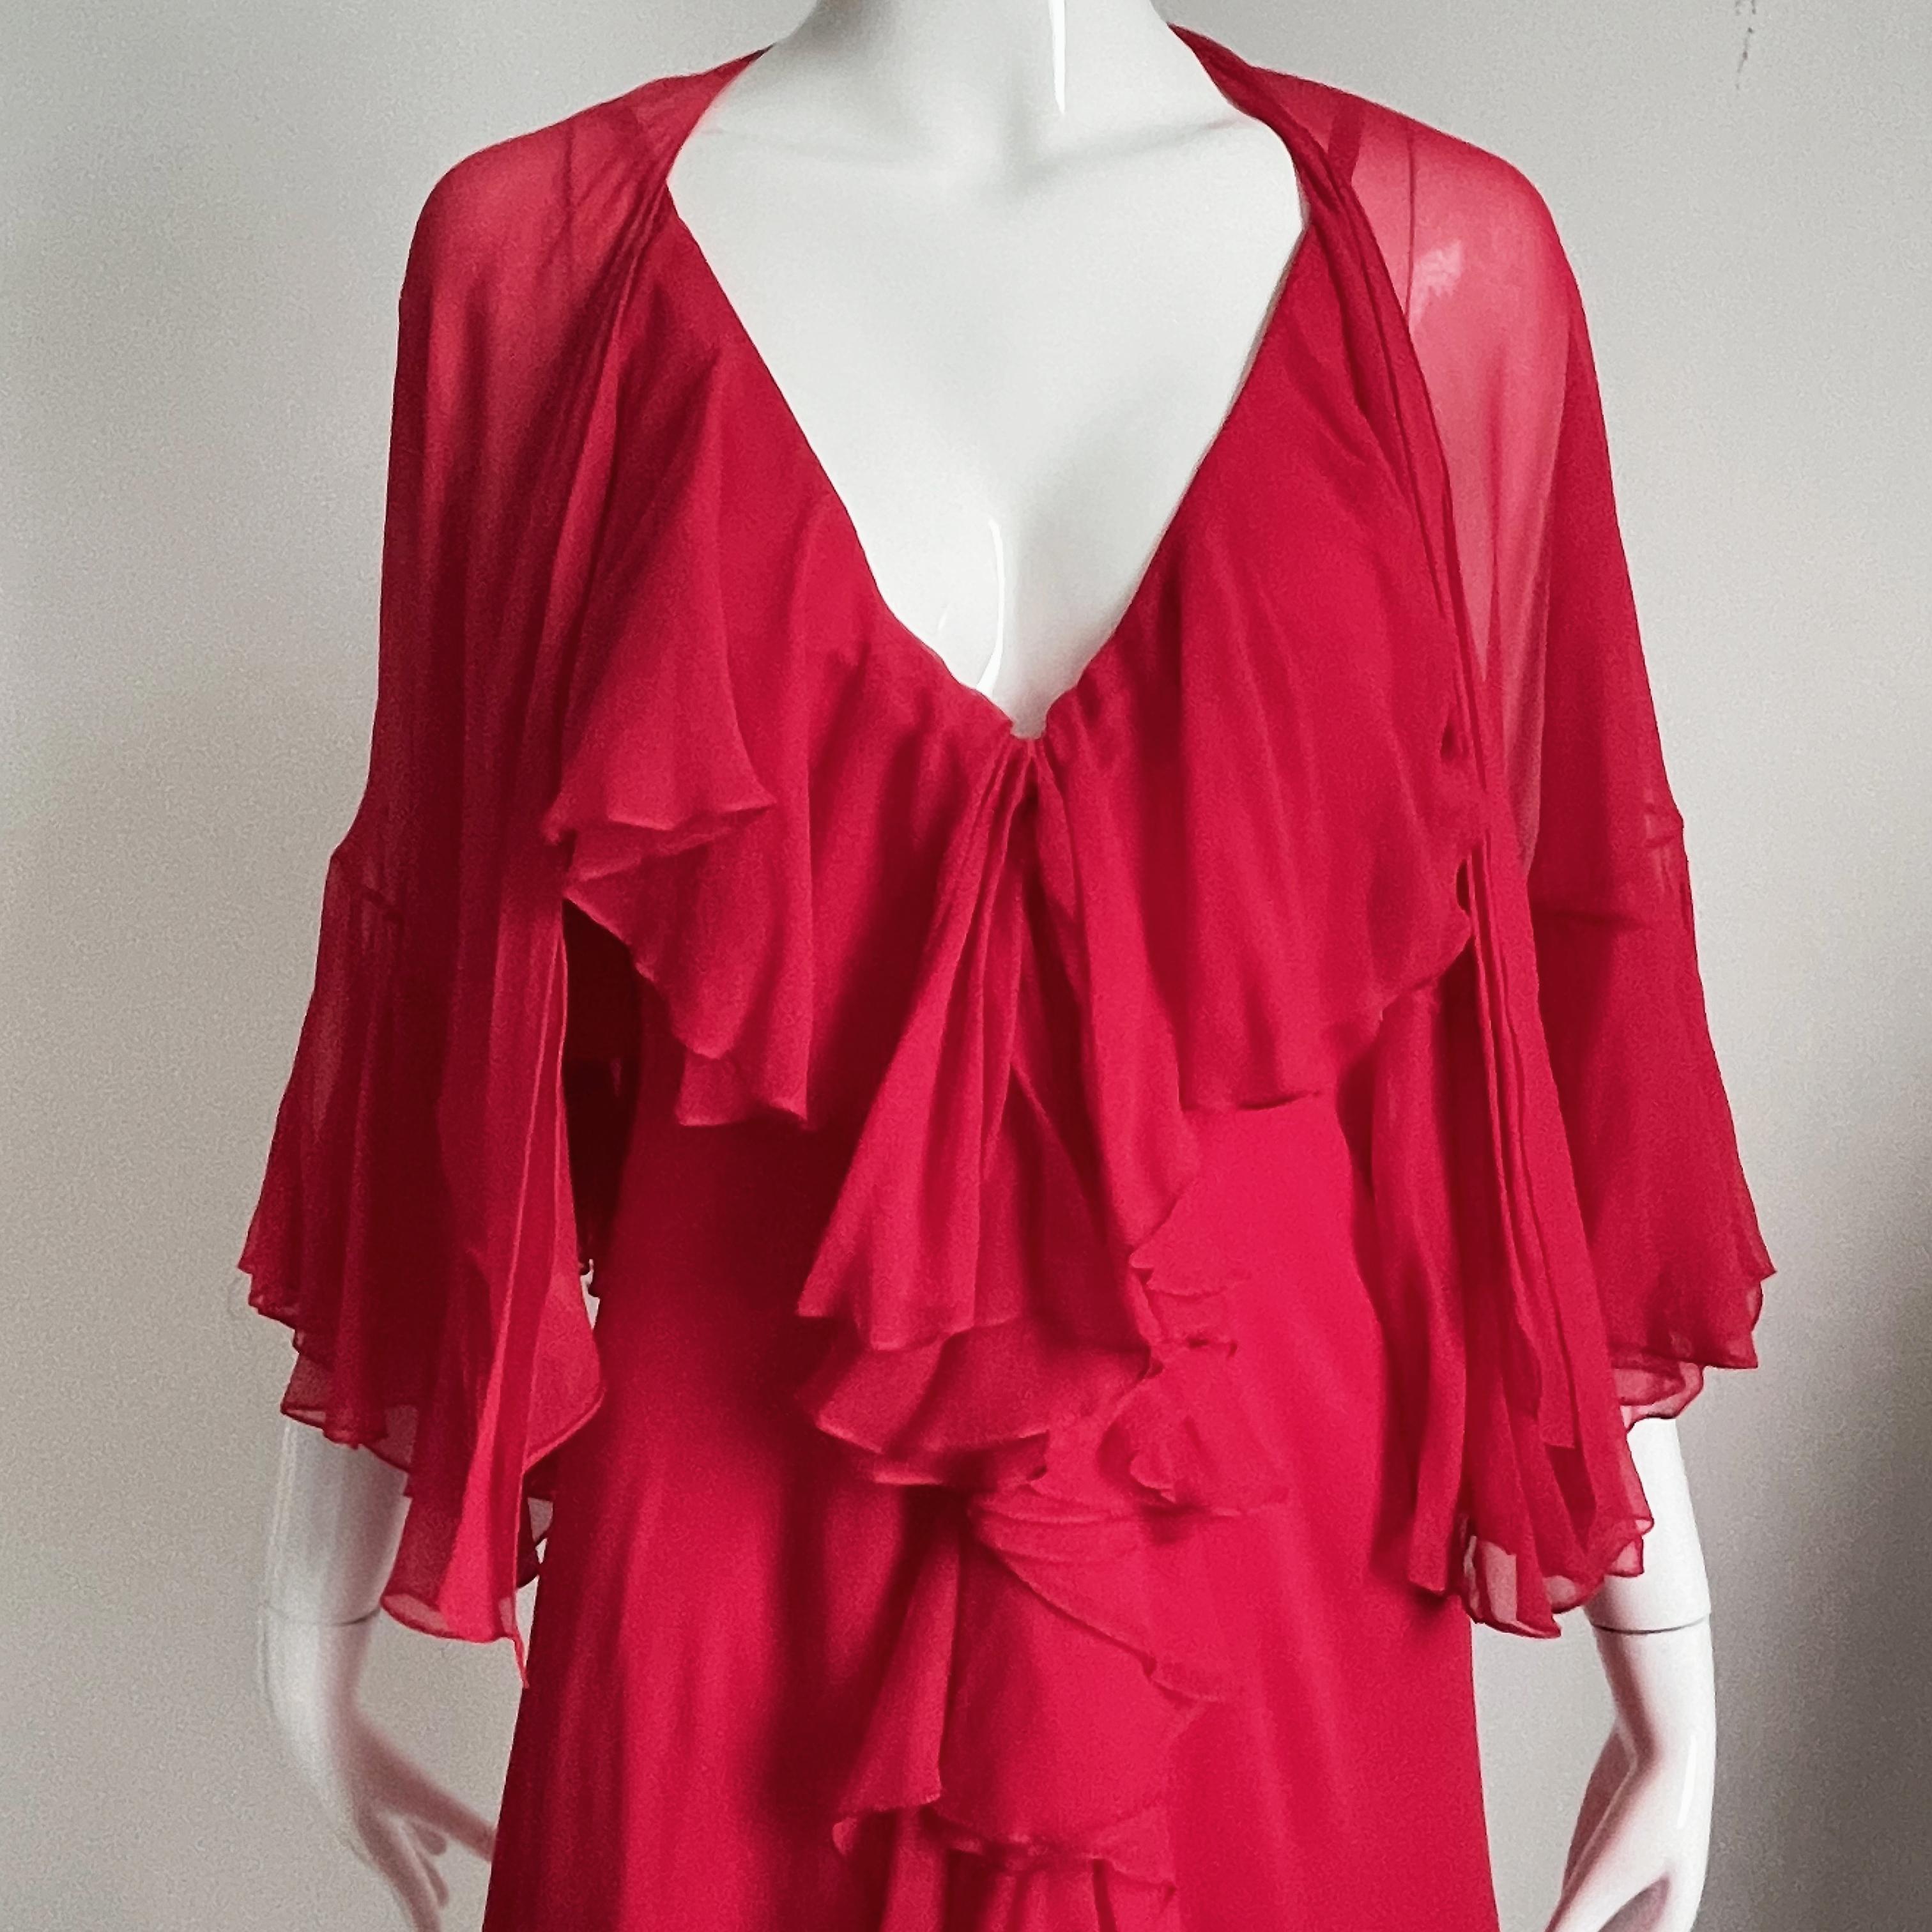 Pauline Trigere Dress and Shawl 2pc Set Red Silk Chiffon Loose Ruffles Vintage In Good Condition For Sale In Port Saint Lucie, FL